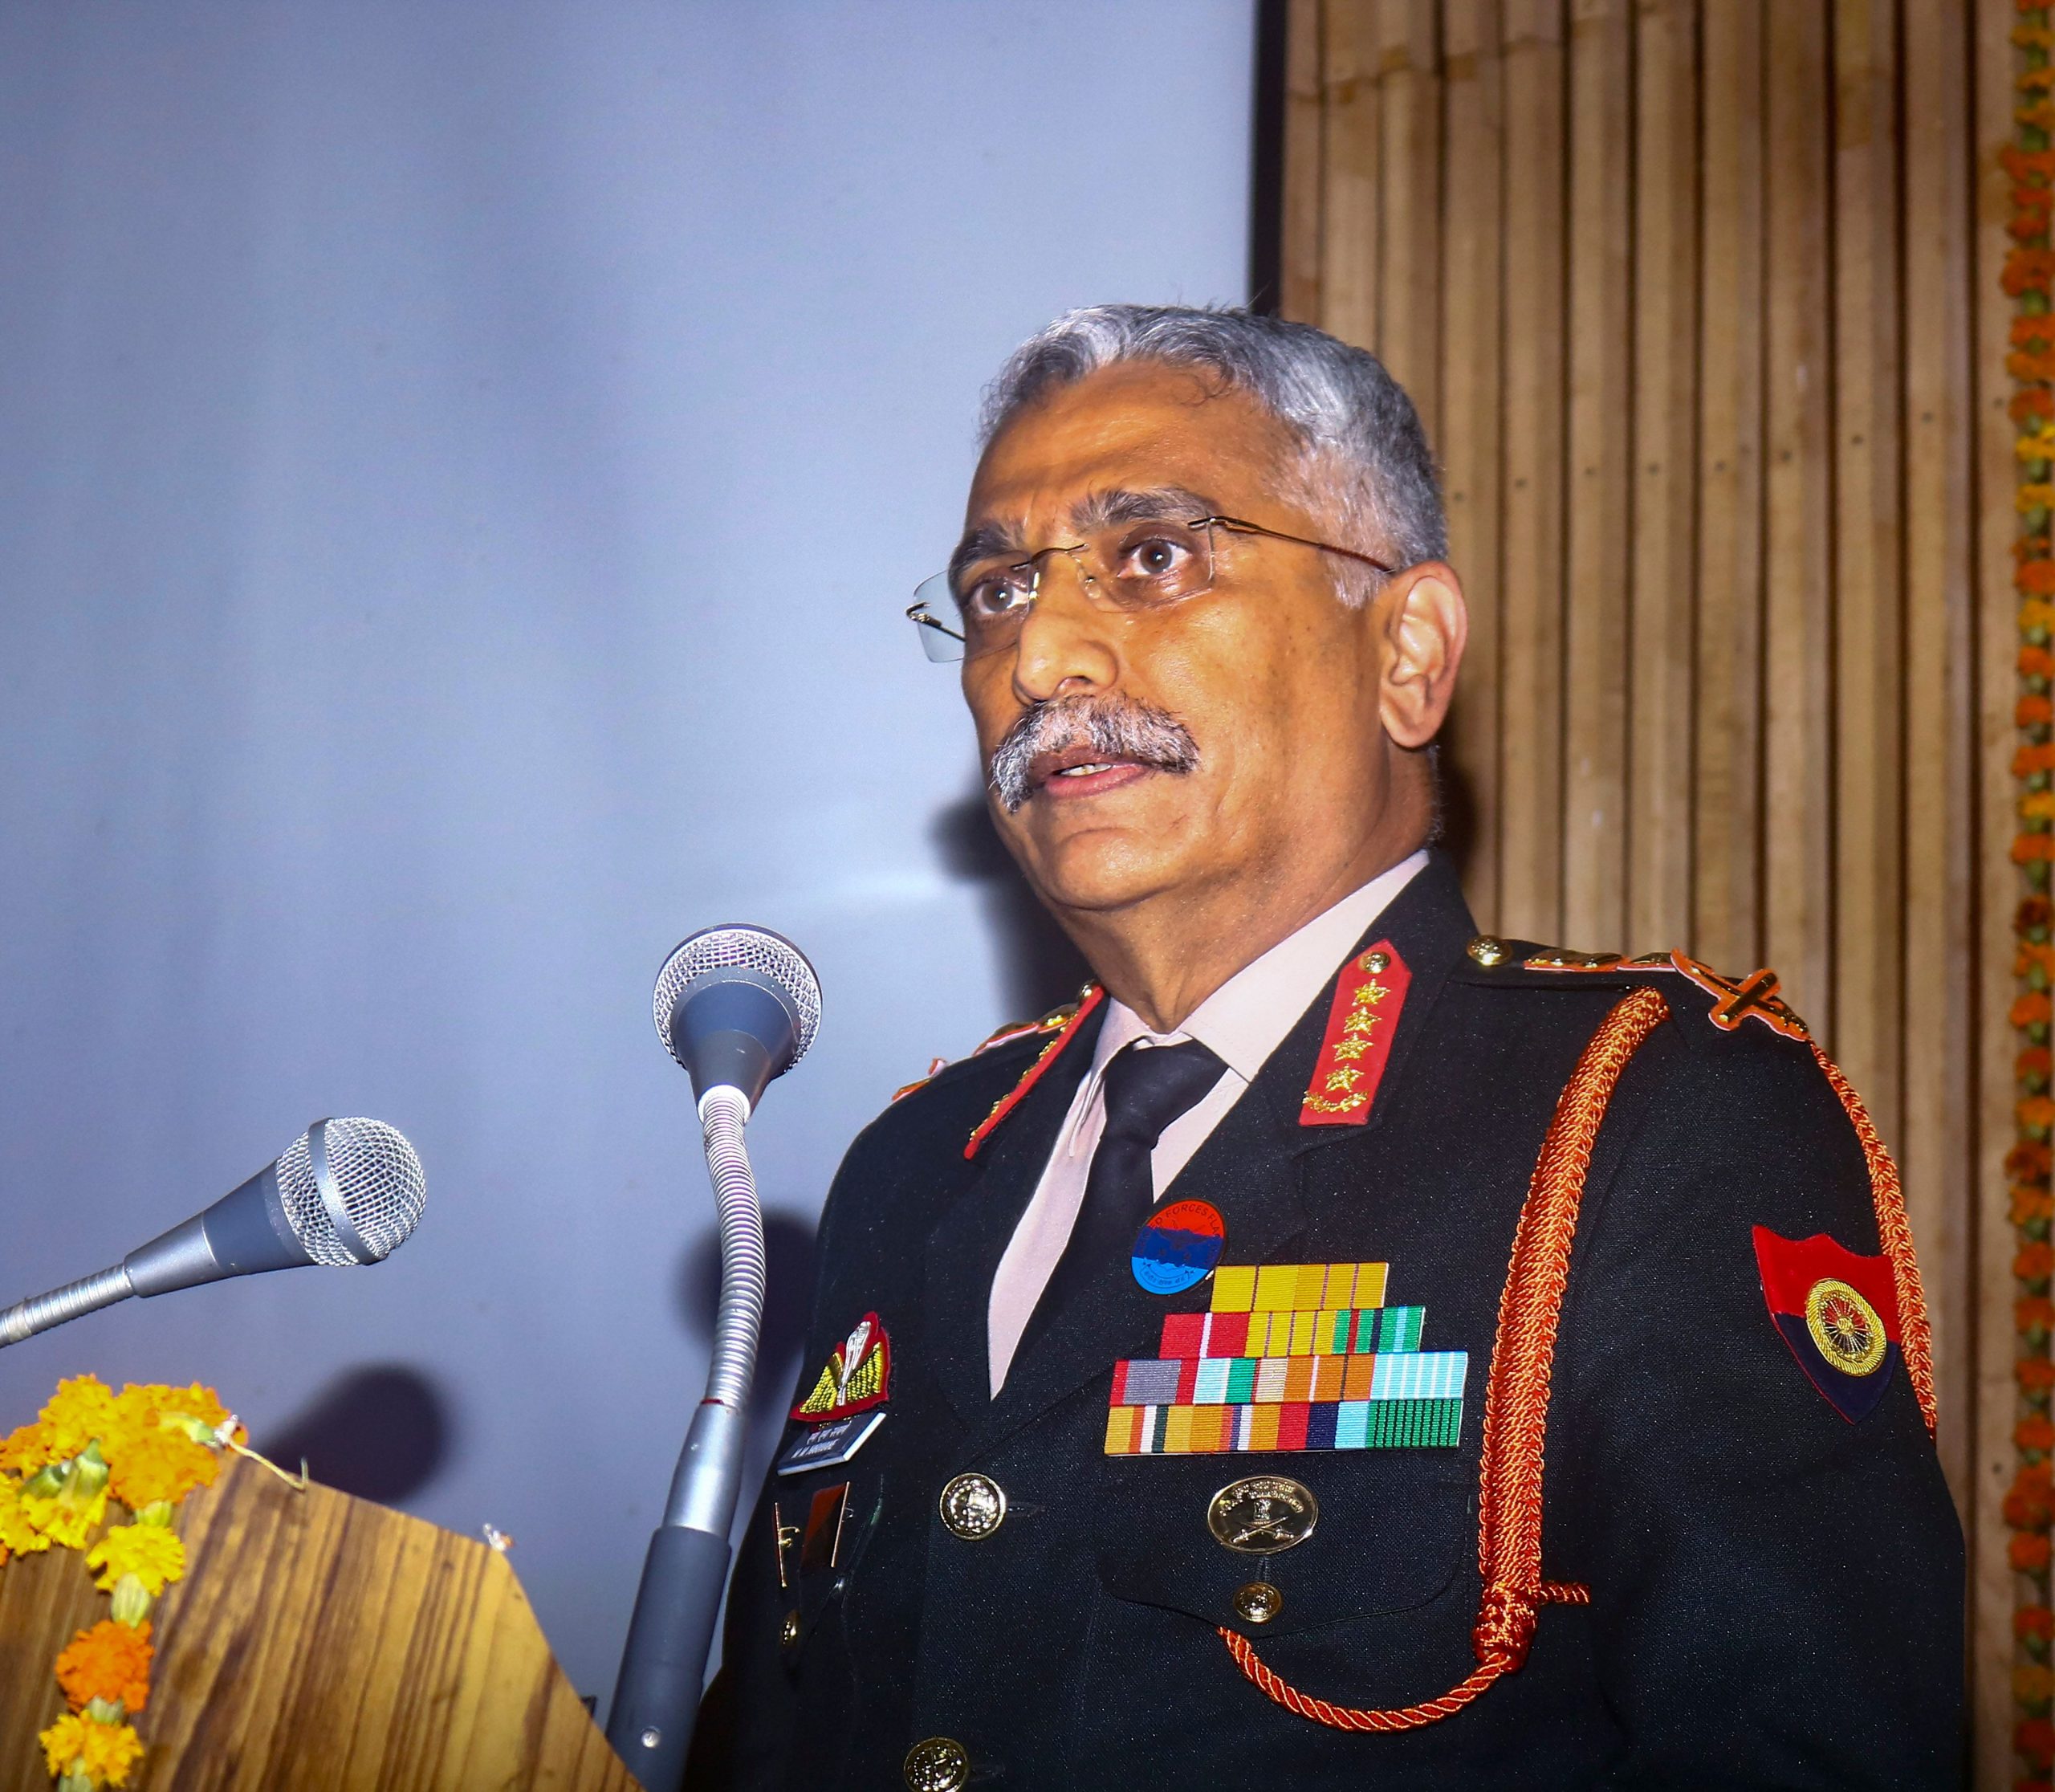 Who is General Manoj Mukund Naravane, the commander of the Indian Army?